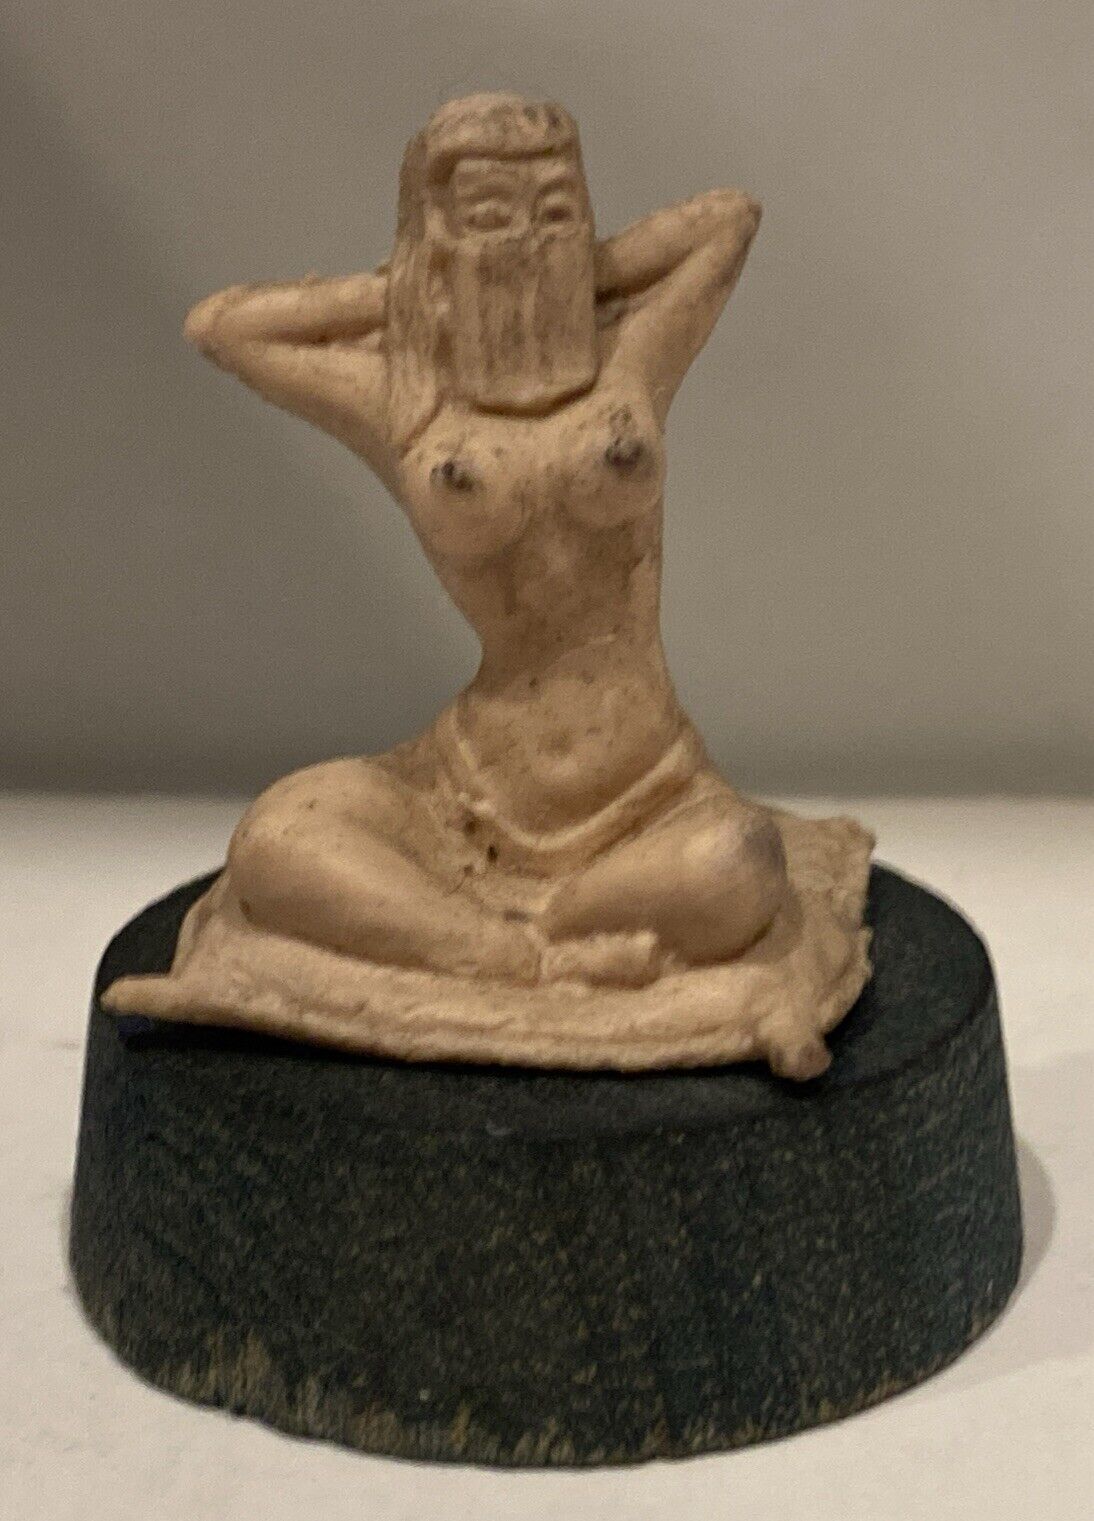 Exotic Harem Dancer That Moves With Crank On Bottom 2” Tall x 1.5” Round 1940’s